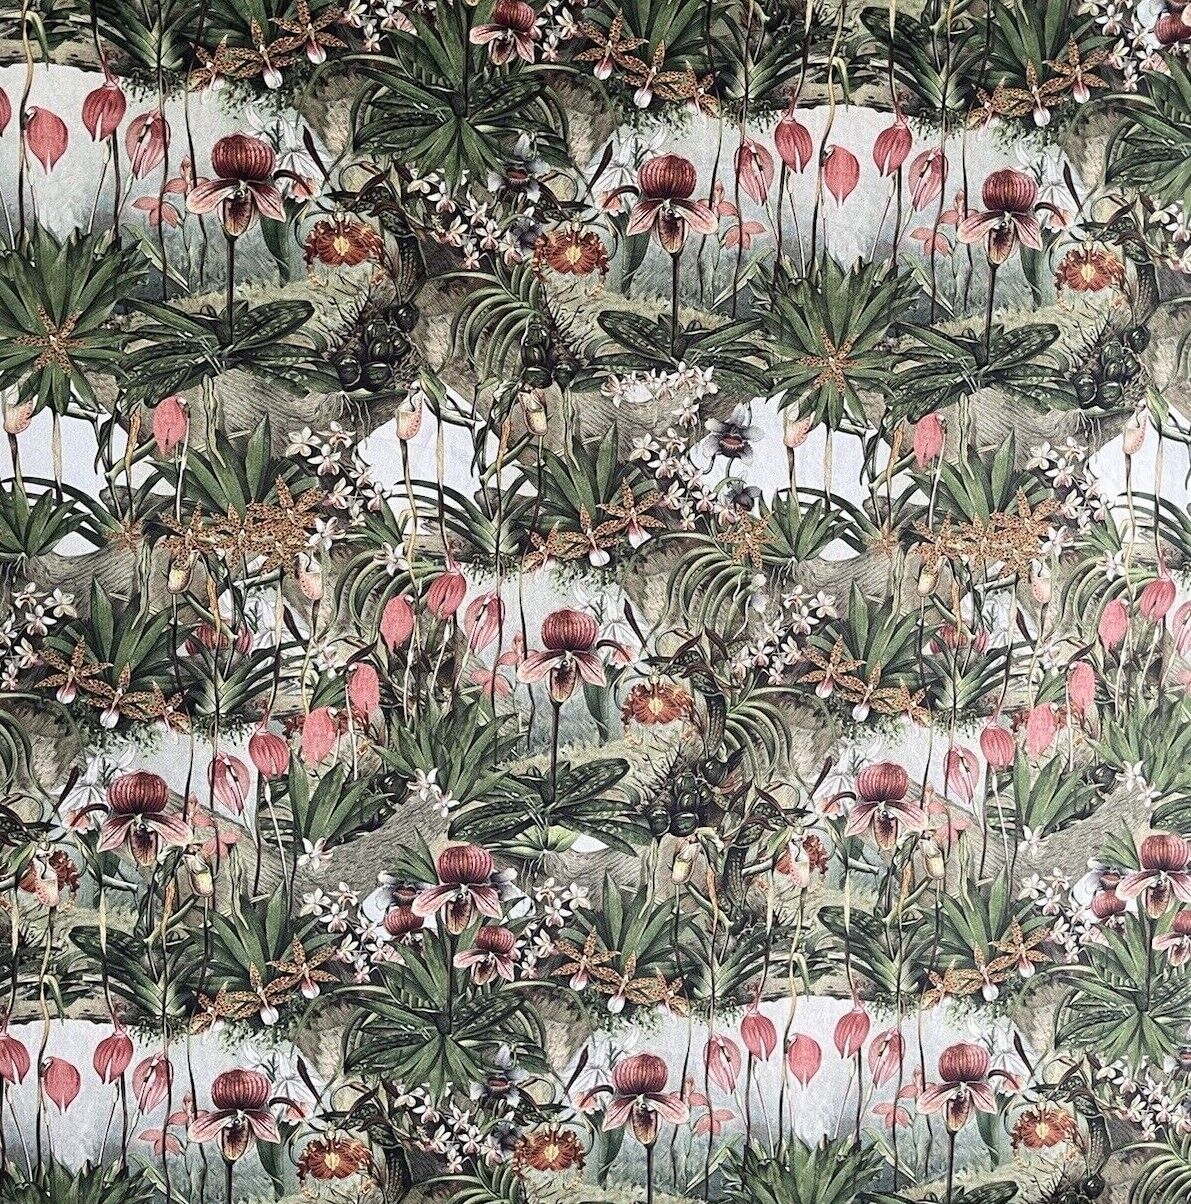 Wilde Orchids Printed Velvet Fabric by Meter Flowers Print Sewing Material Sold Per Yards Metres Green Botanical Textile For Upholstery PillowsYellow Pink Peach